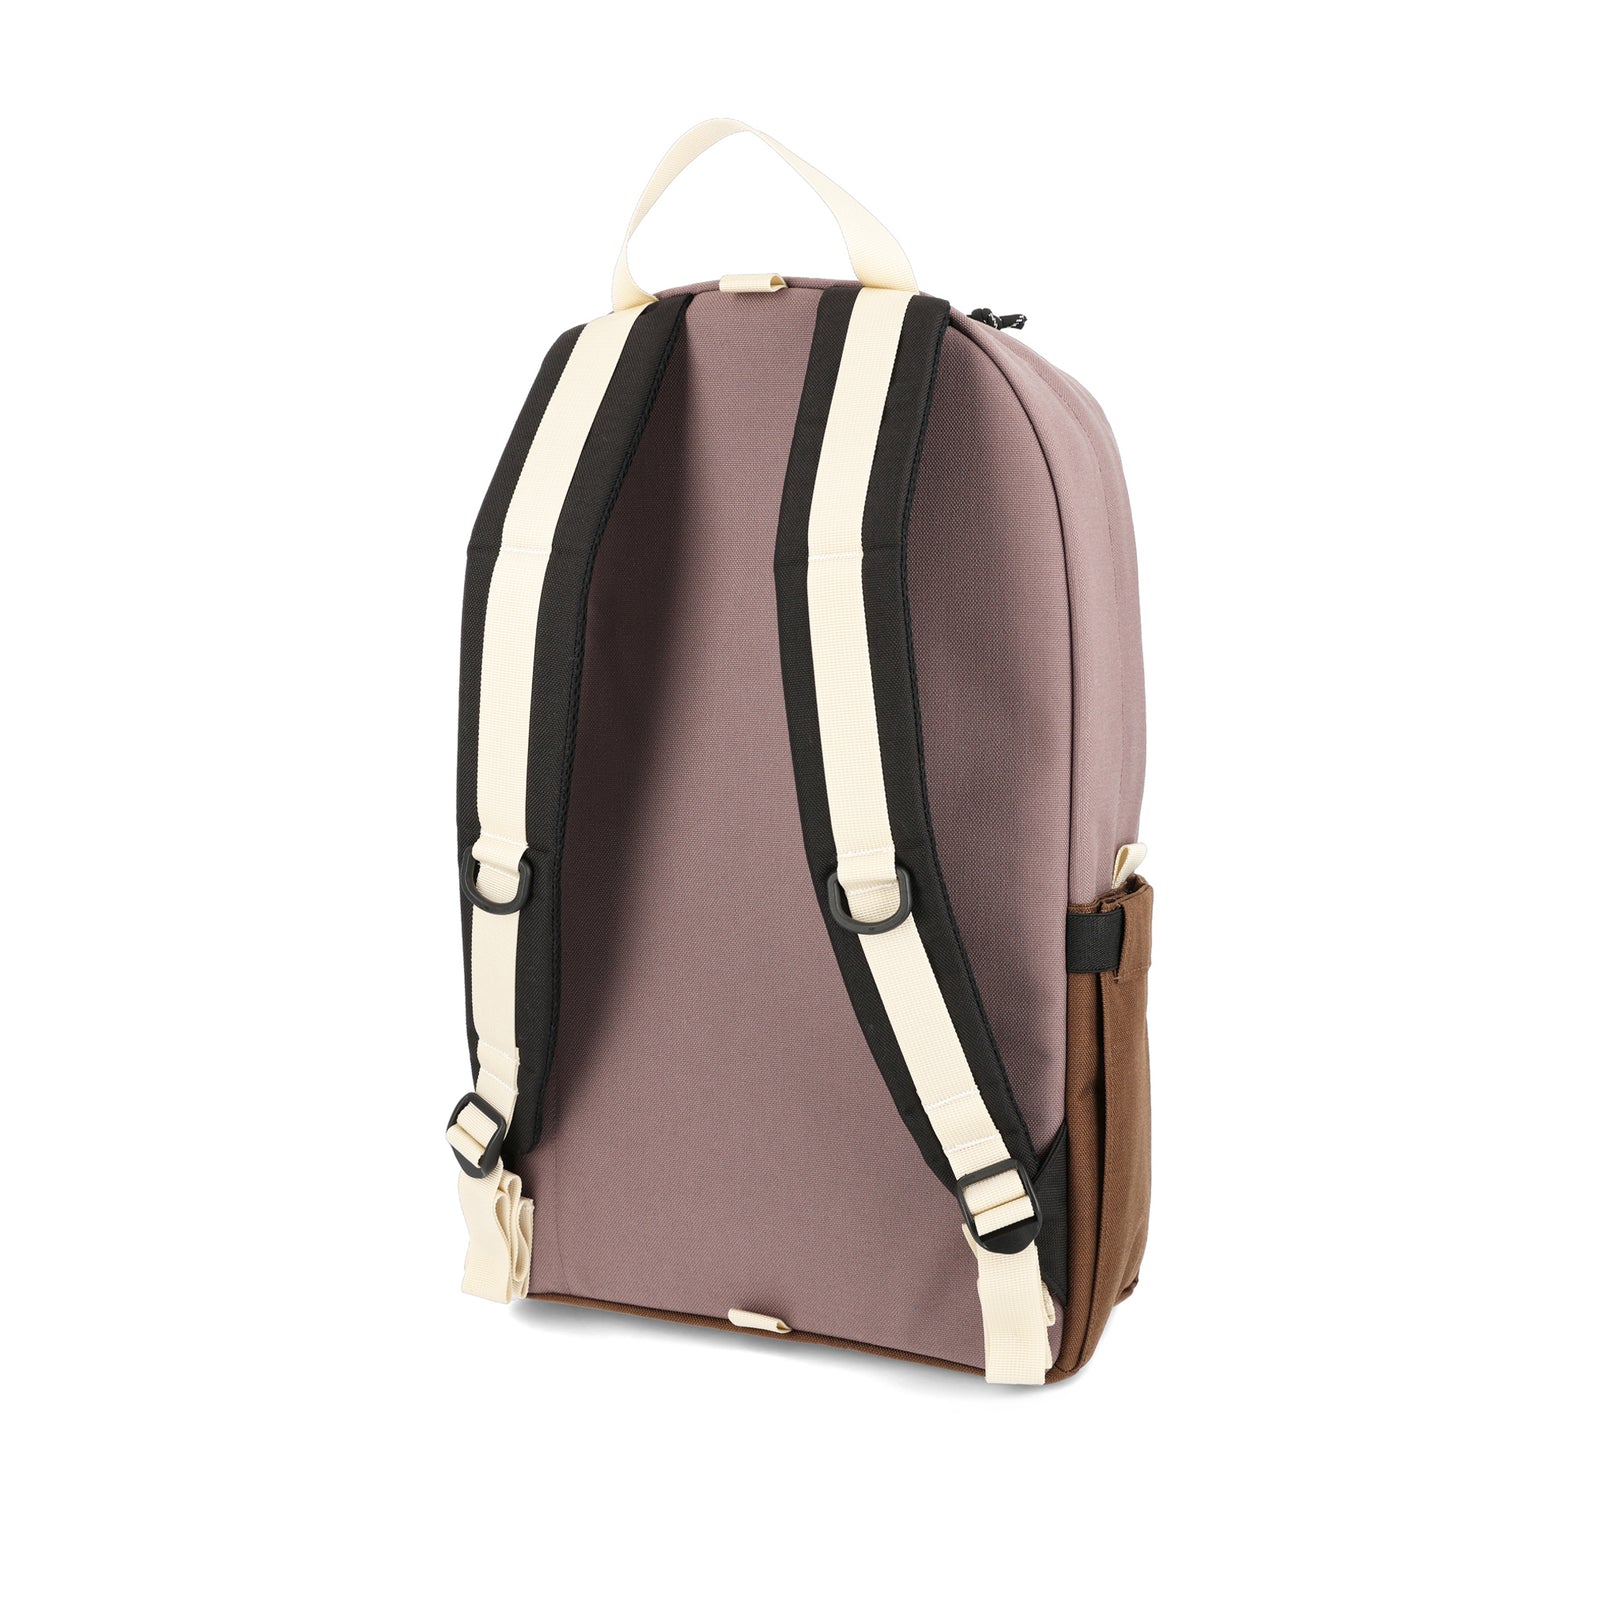 Back of Topo Designs Daypack Classic 100% recycled nylon laptop backpack for work or school in "Peppercorn / Cocoa" purple brown